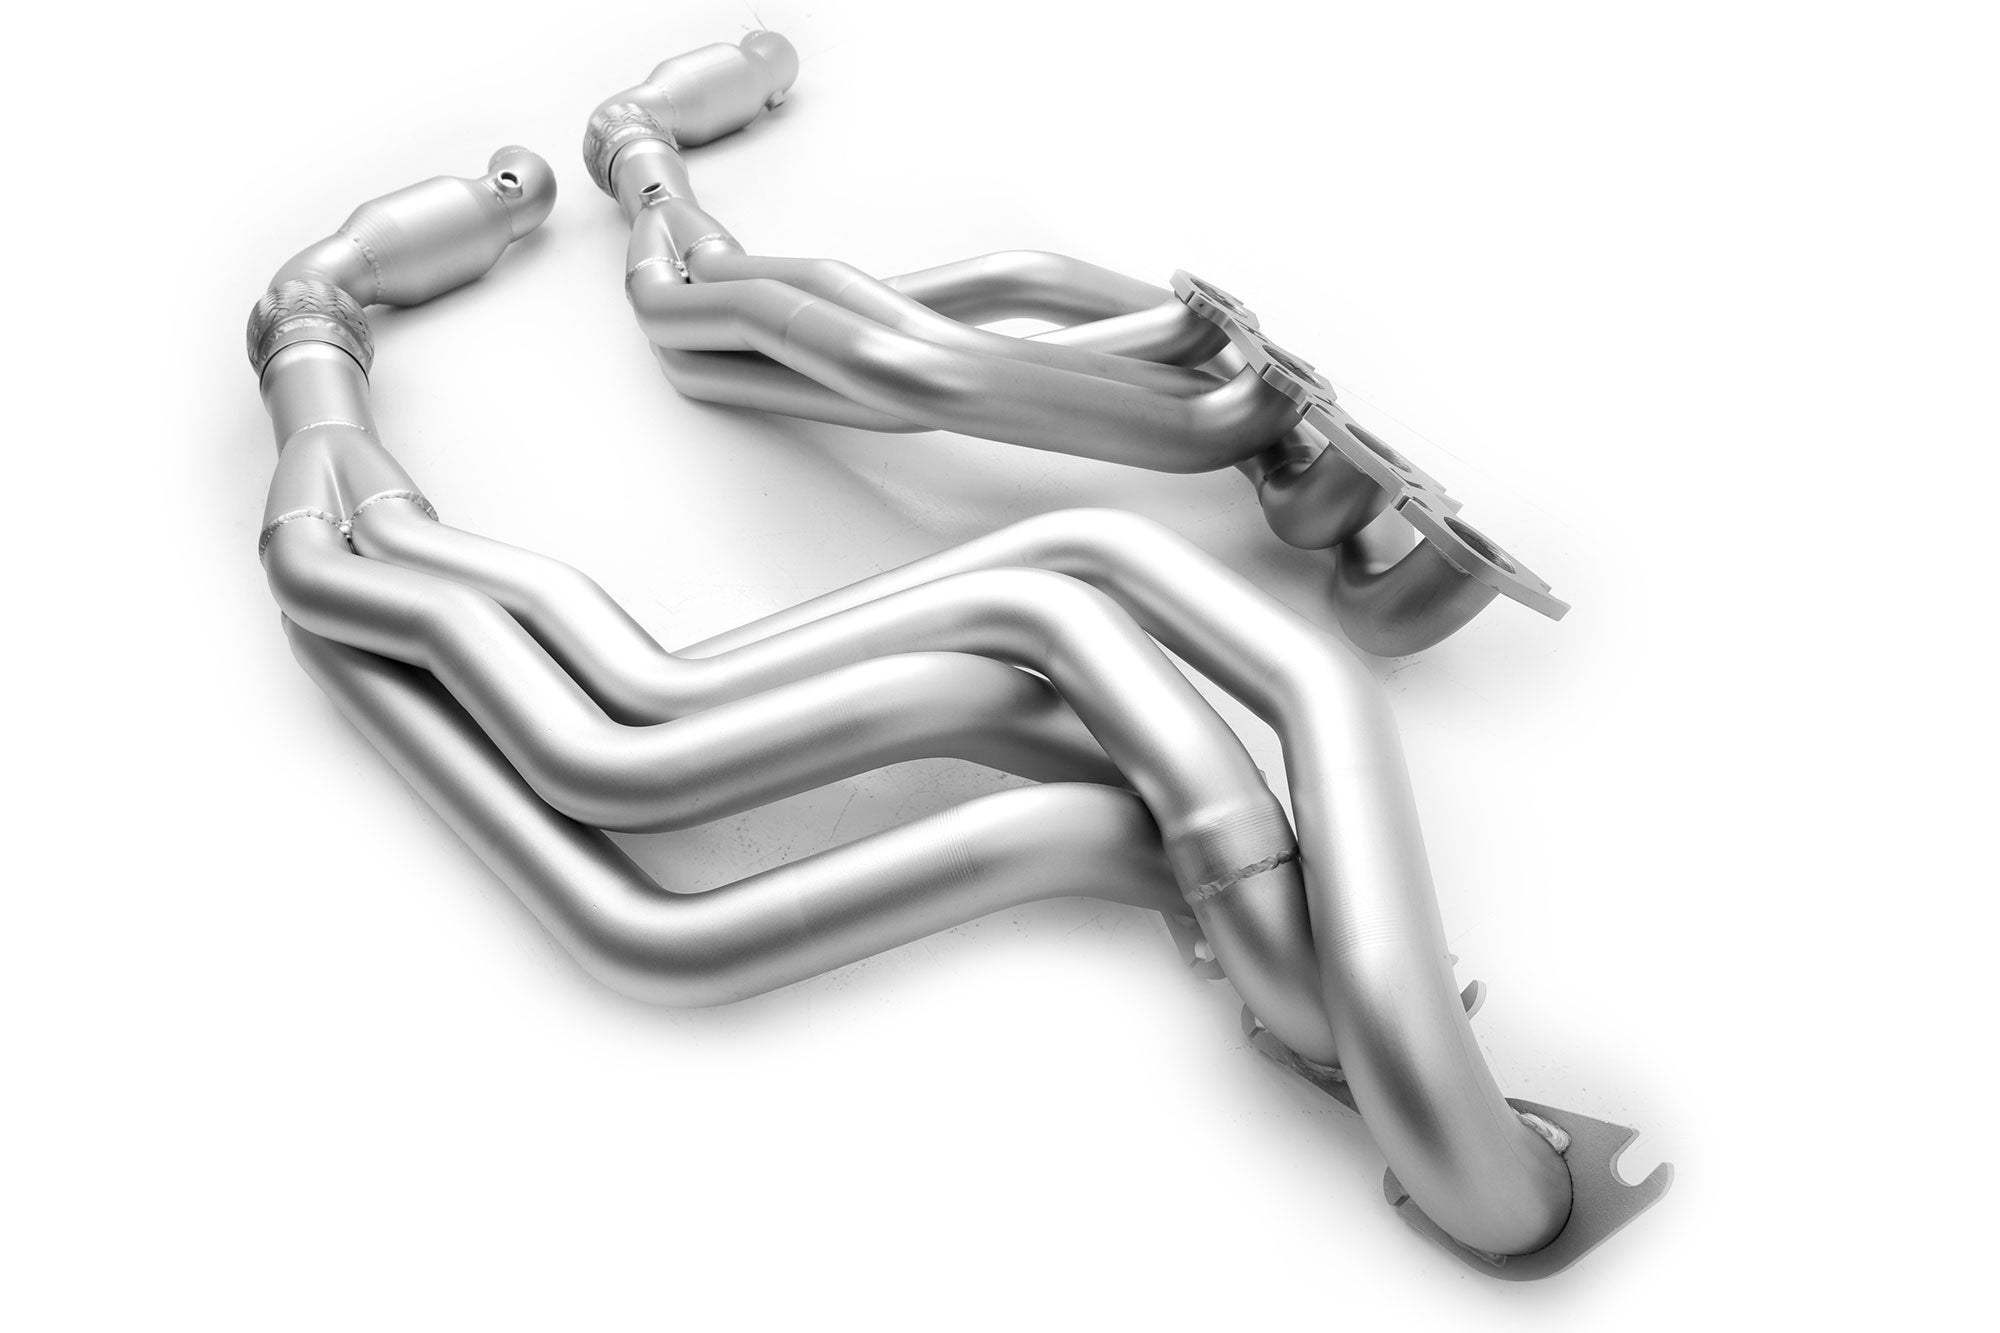 Tubo lungo Mustang LTH S550 Headers - Gatto / Decat (2015-23)